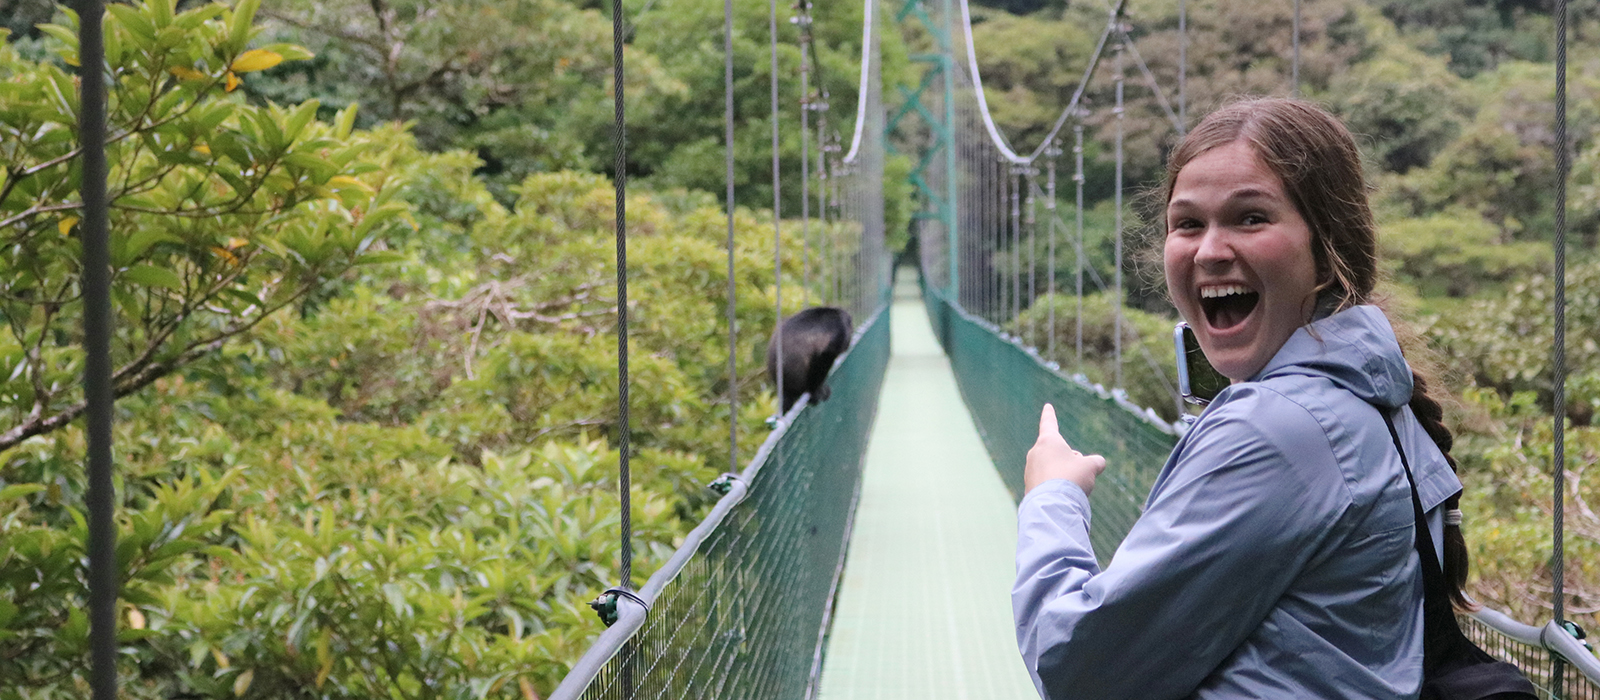 a Husker student reacts to seeing a monkey on a suspension bridge in Costa Rica